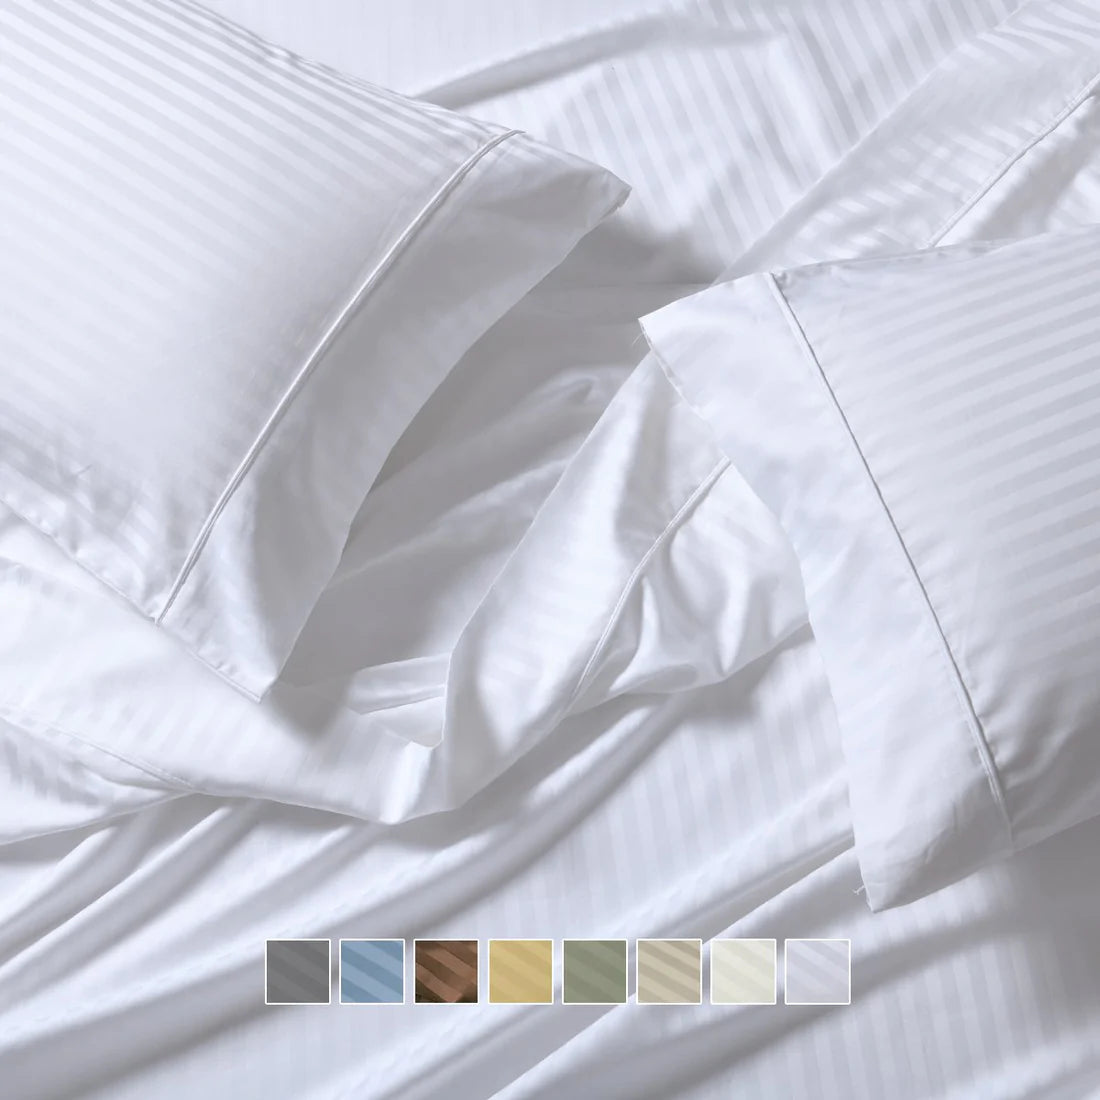 Buy Egyptian Cotton Solid White Flat Sheets 1000 Thread Counts at- Egyptianhomelinens.com